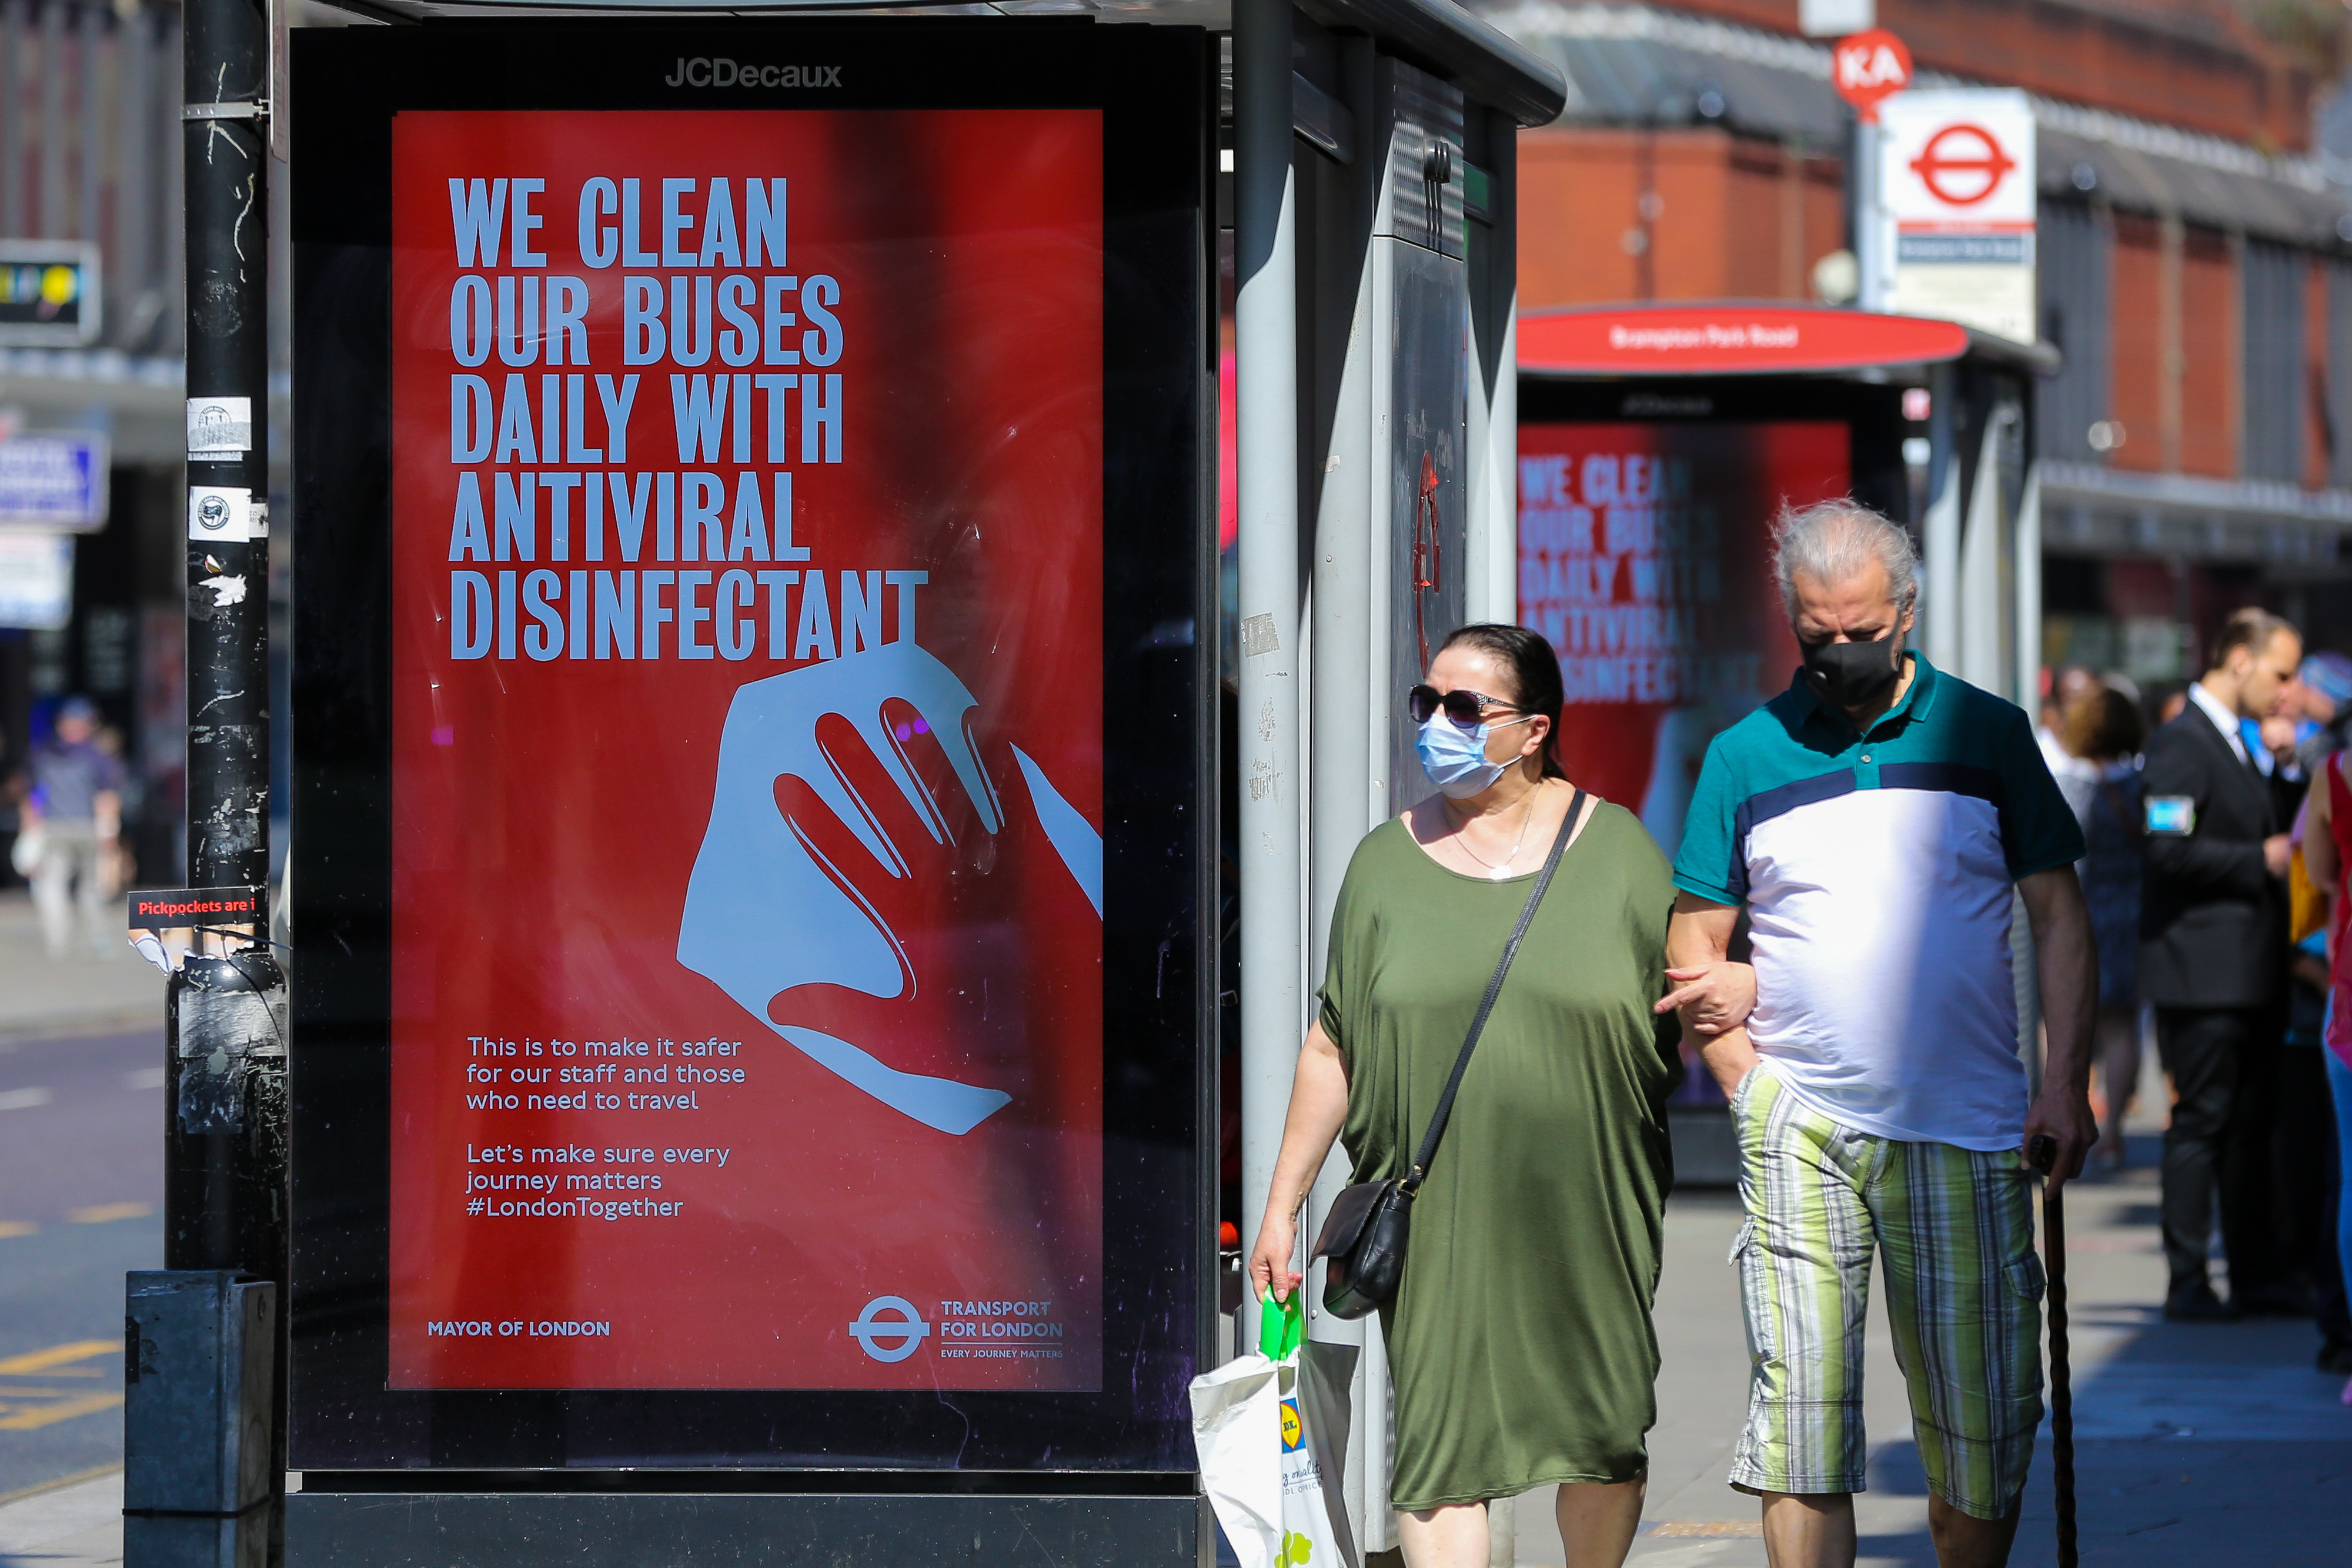 A couple wearing face masks as a preventive measure walk past 'We Clean Our Buses Daily With Antiviral Disinfectant' a Transport for London's digital COVID-19 campaign, in London. (Photo by Dinendra Haria / SOPA Images/Sipa USA)